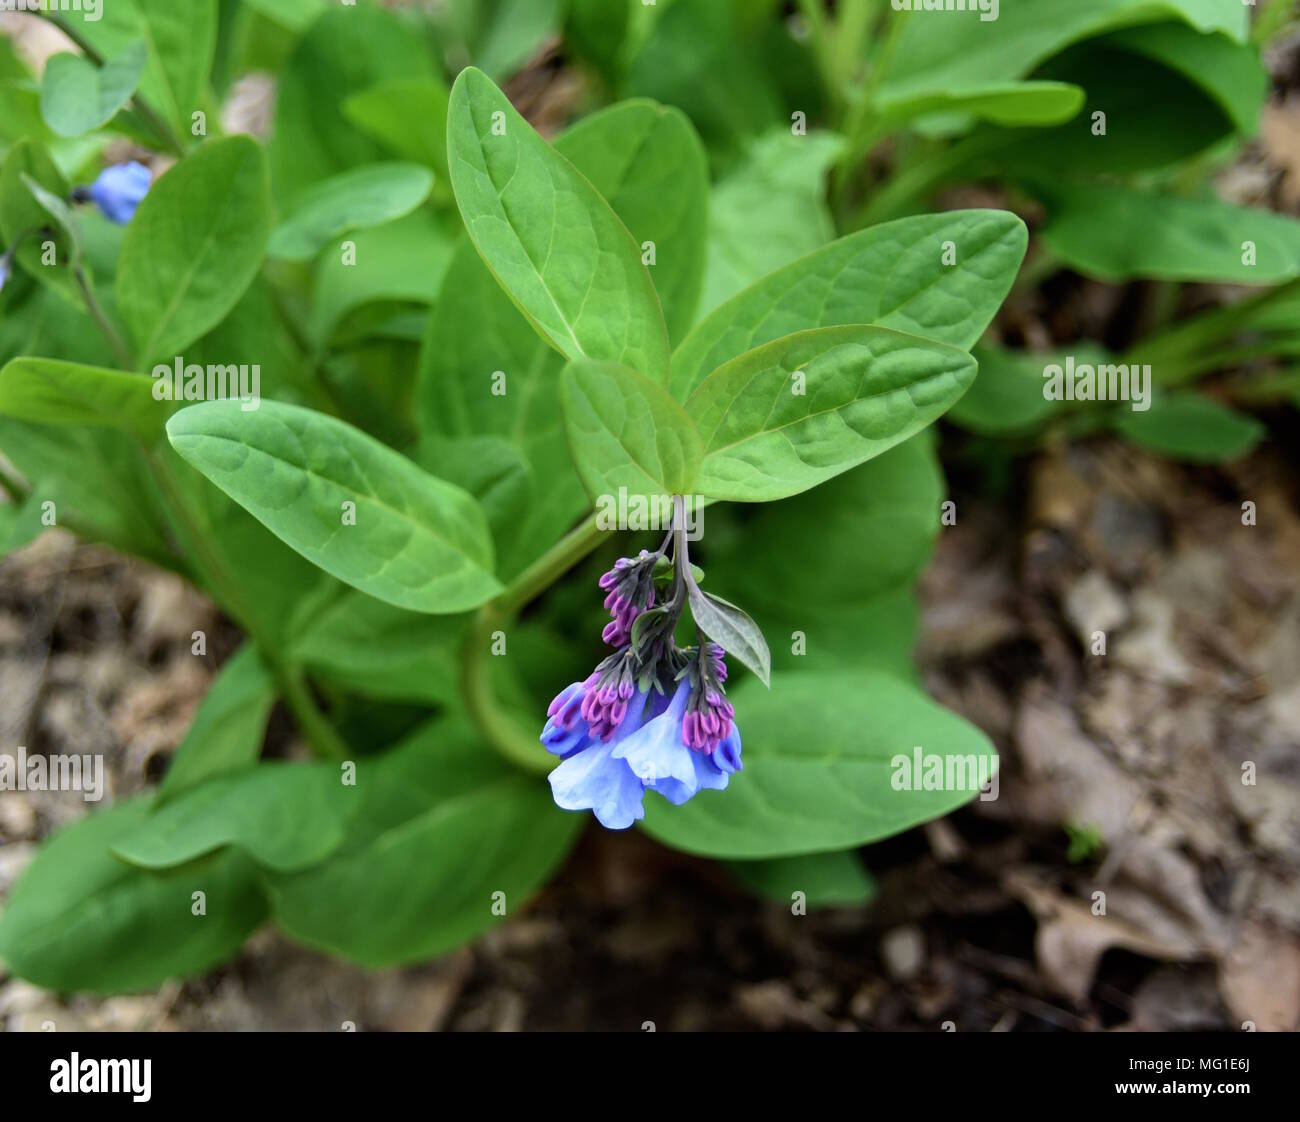 Blue flowers and purple buds of Virginia bluebells in a spring forest. Stock Photo